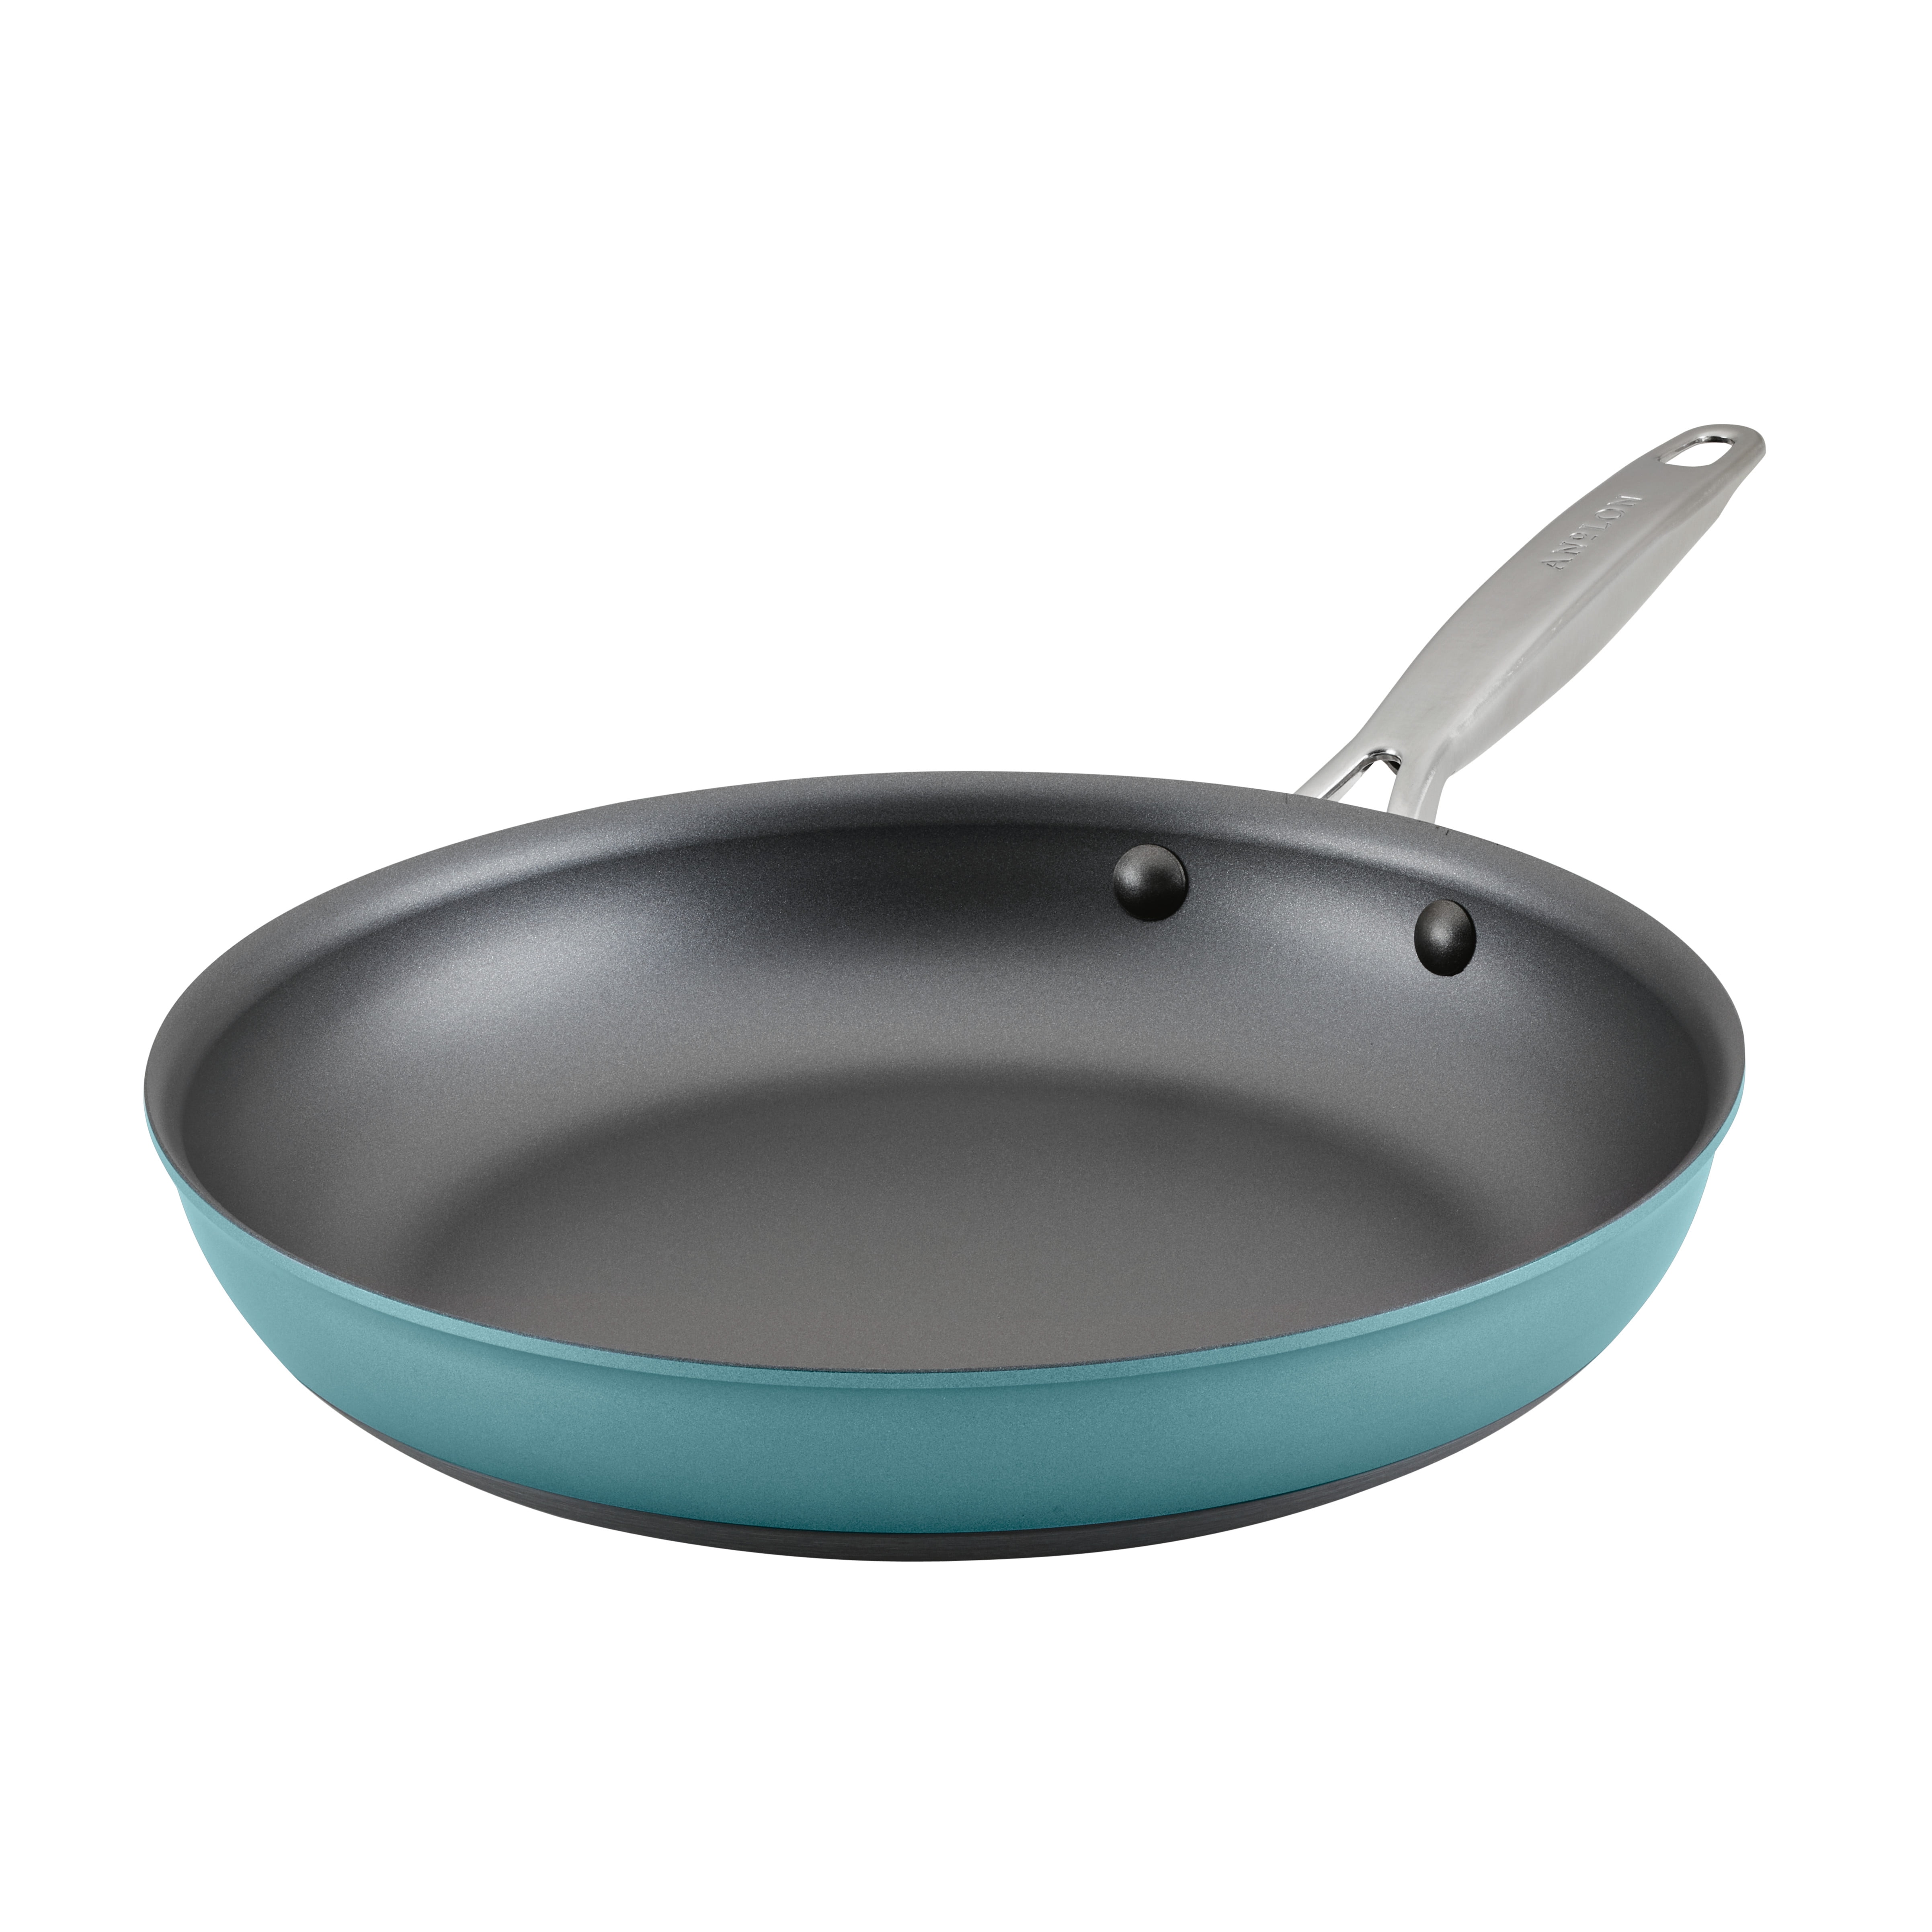 Anolon 87538 Smart Stack Hard Anodized Nonstick Frying Pan / Fry Pan / Hard  Anodized Skillet - 12 Inch, Black